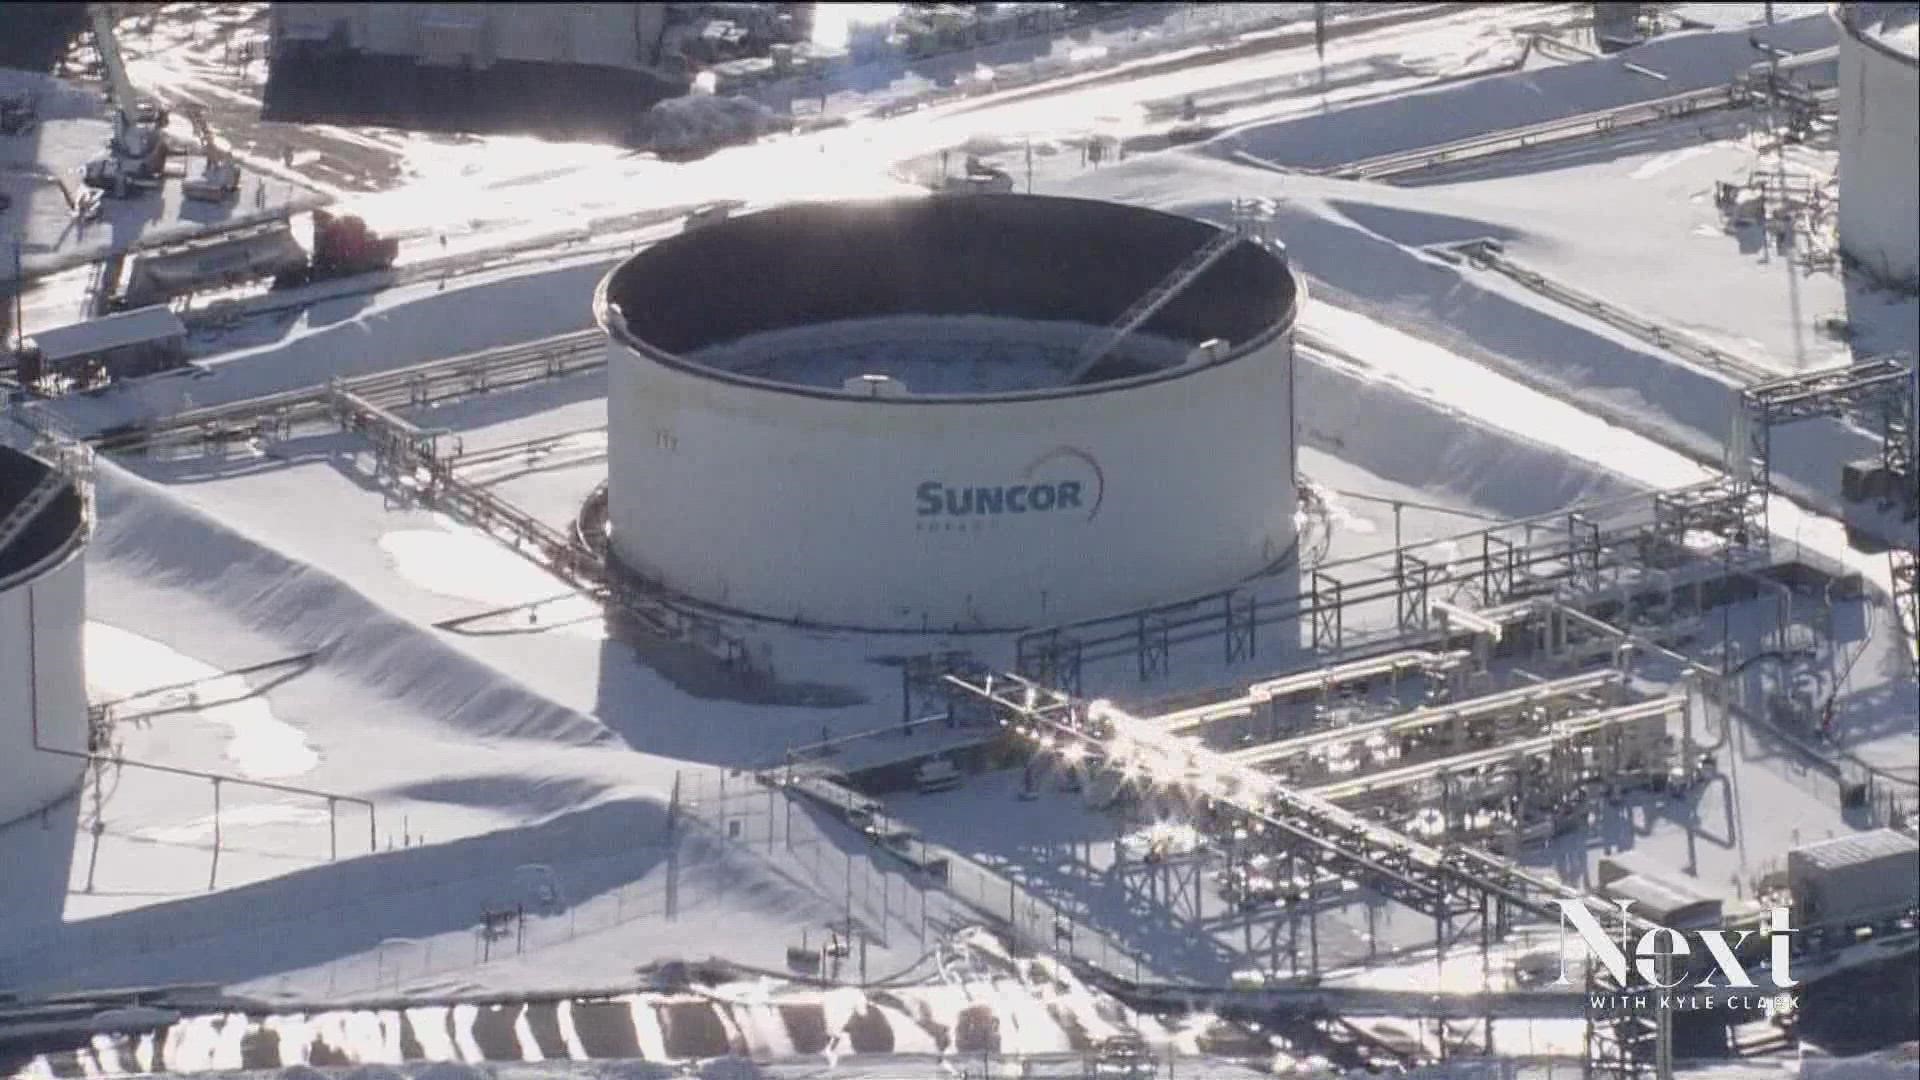 In early January, Suncor filed a notice with the state health department that benzene levels in Sand Creek exceeded what's allowed by the state.